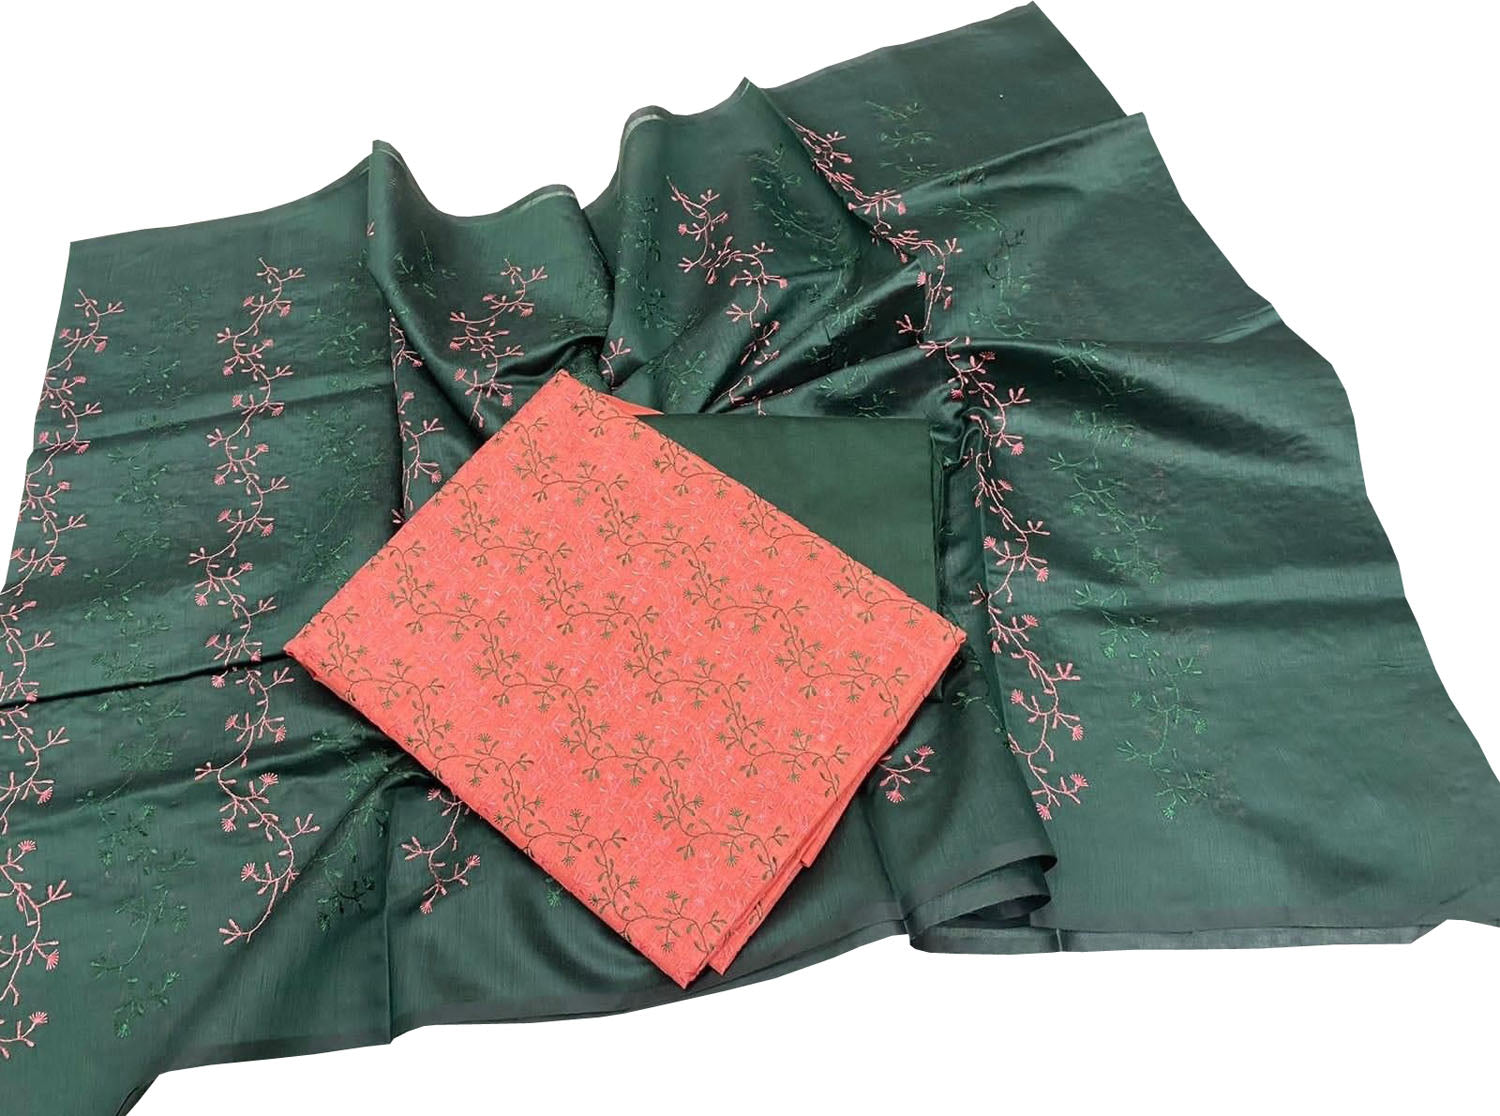 Stunning Green and OrangeTussar Silk Suit with Embroidery